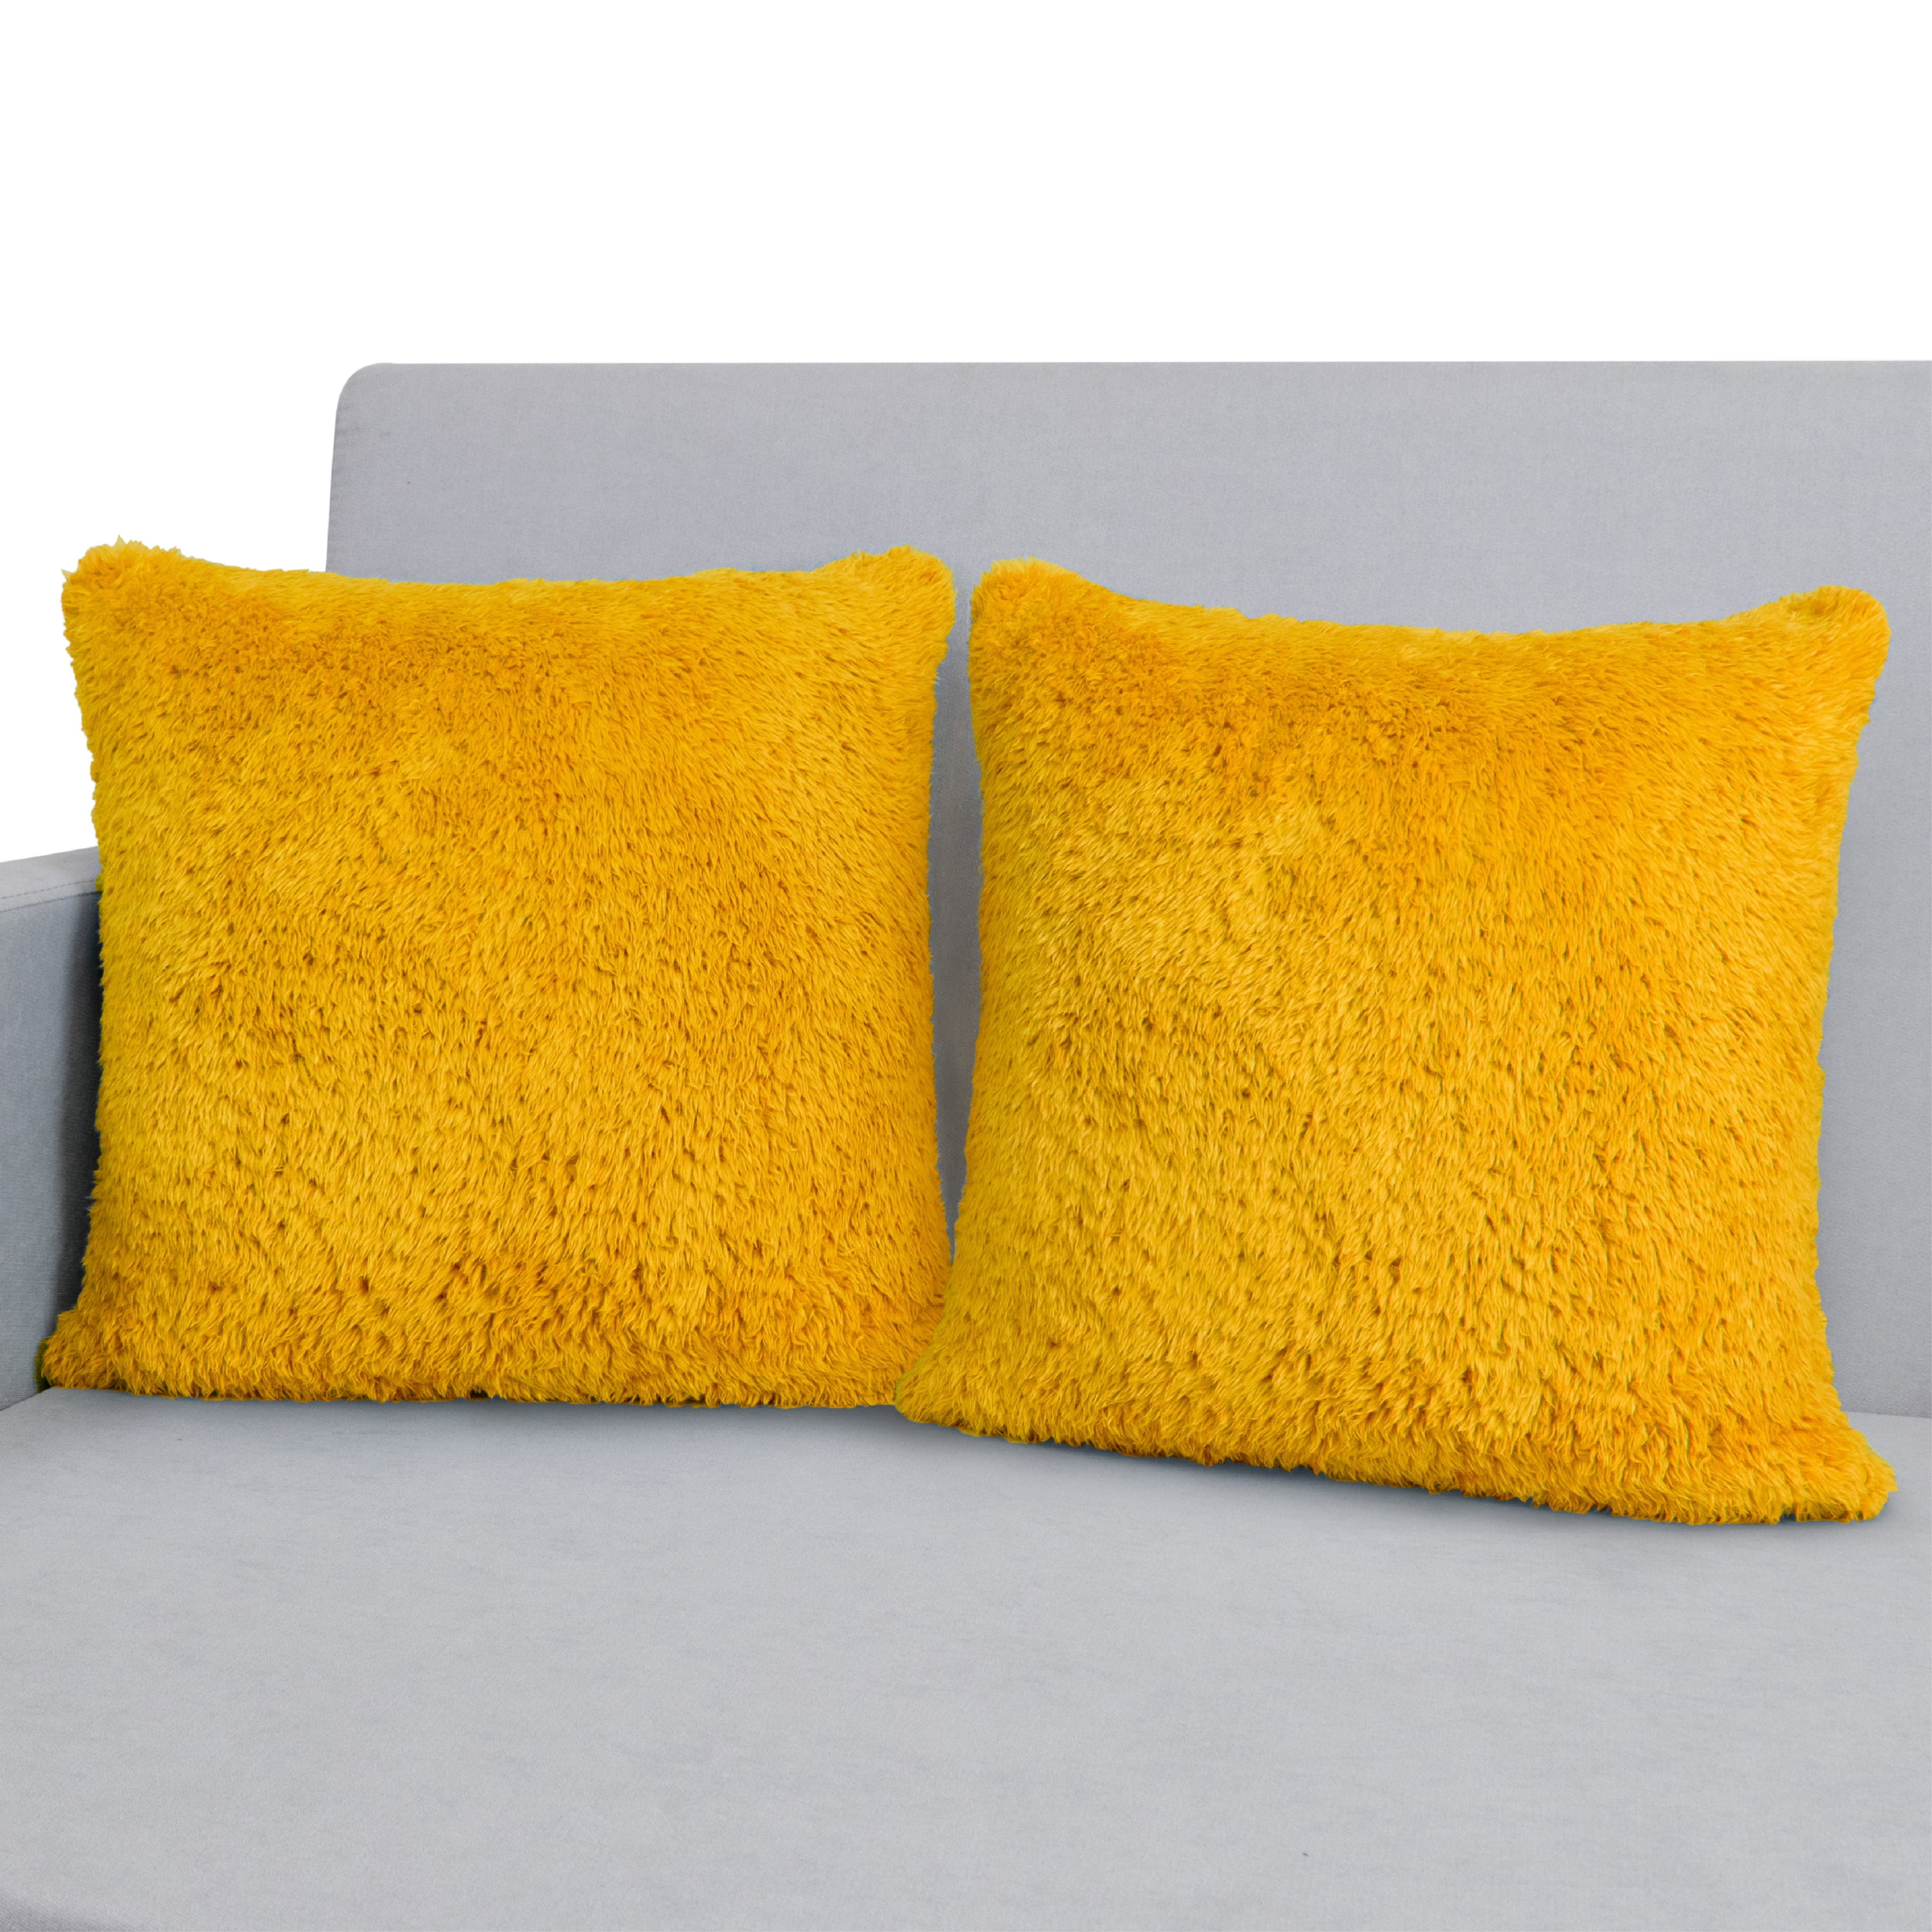 Mustard Yellow Fur Throw Pillow Covers 3D Rose Pattern Set of 2 12x20 Inch Fluffy Decorative Pillow Covers for Couch Bed Sofa 